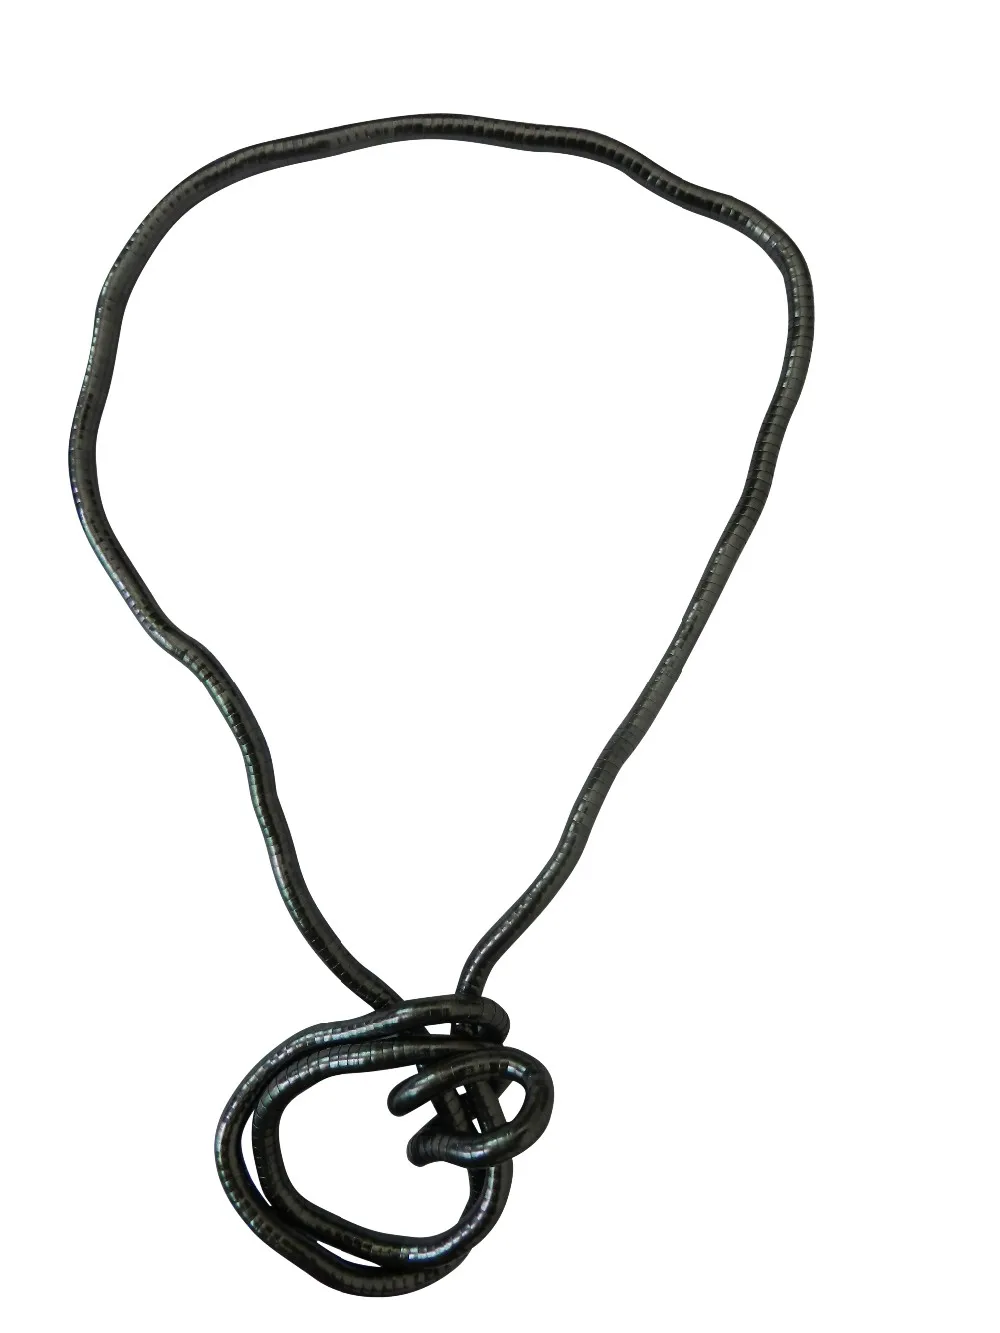 NEW Hurry! Wear You Like Wear Twisted Necklace 900mm Length Bendable Snake Chain Flexible Twist Jewelry Necklaces